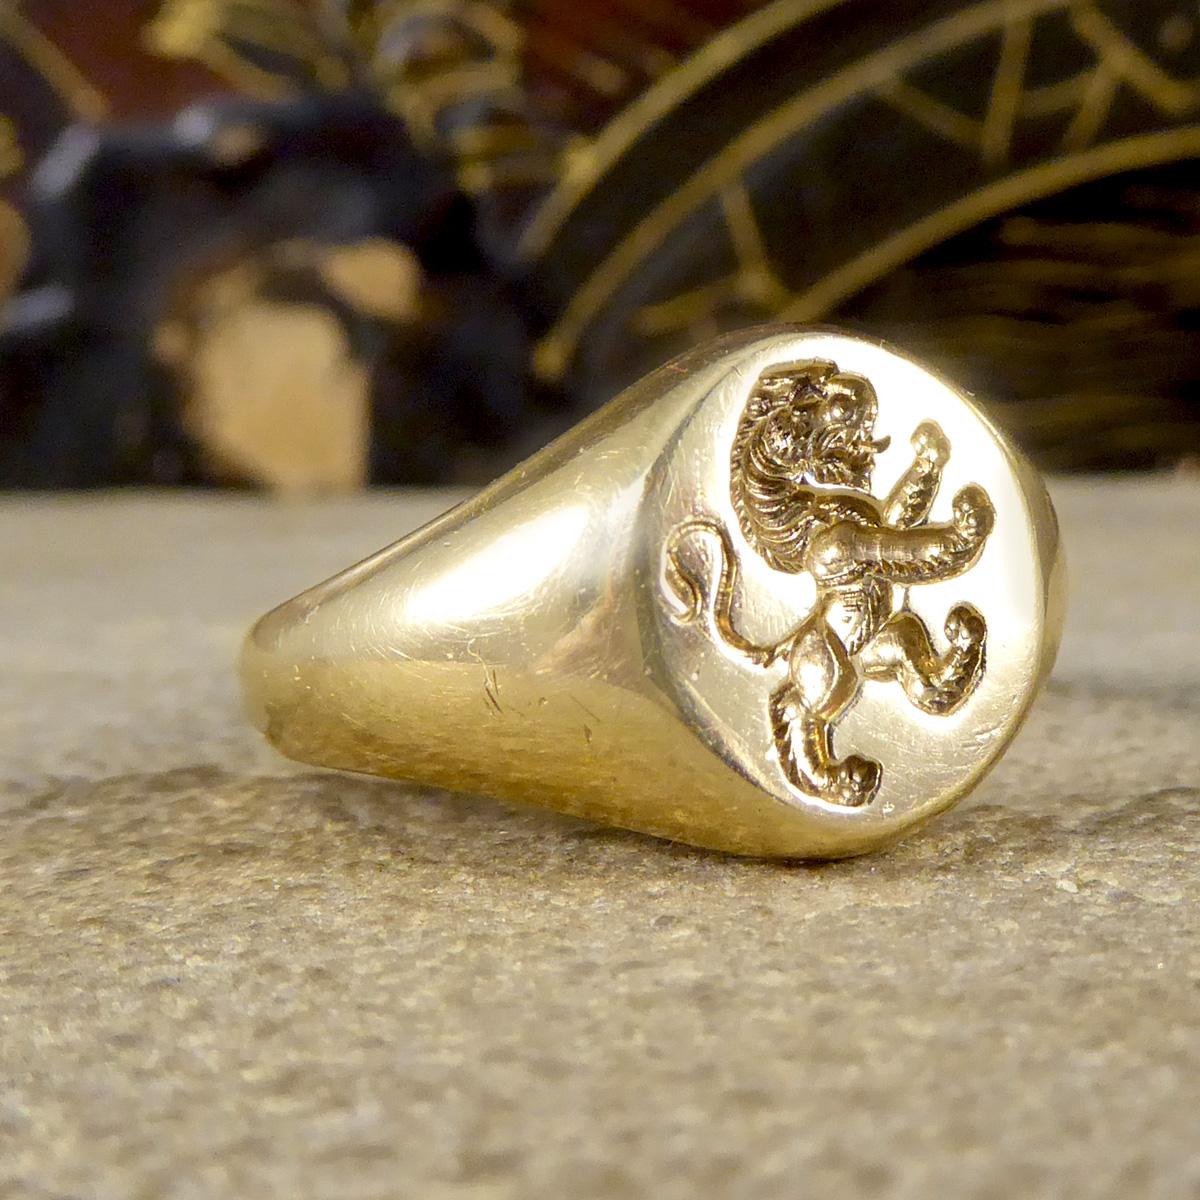 This vintage ring it typically worn by men as a gents signet but can also be worn my women as a unisex piece. It has such a quality feel and usually worn on the pinky finger. This signet ring features an English Lion crest seal on the head of the